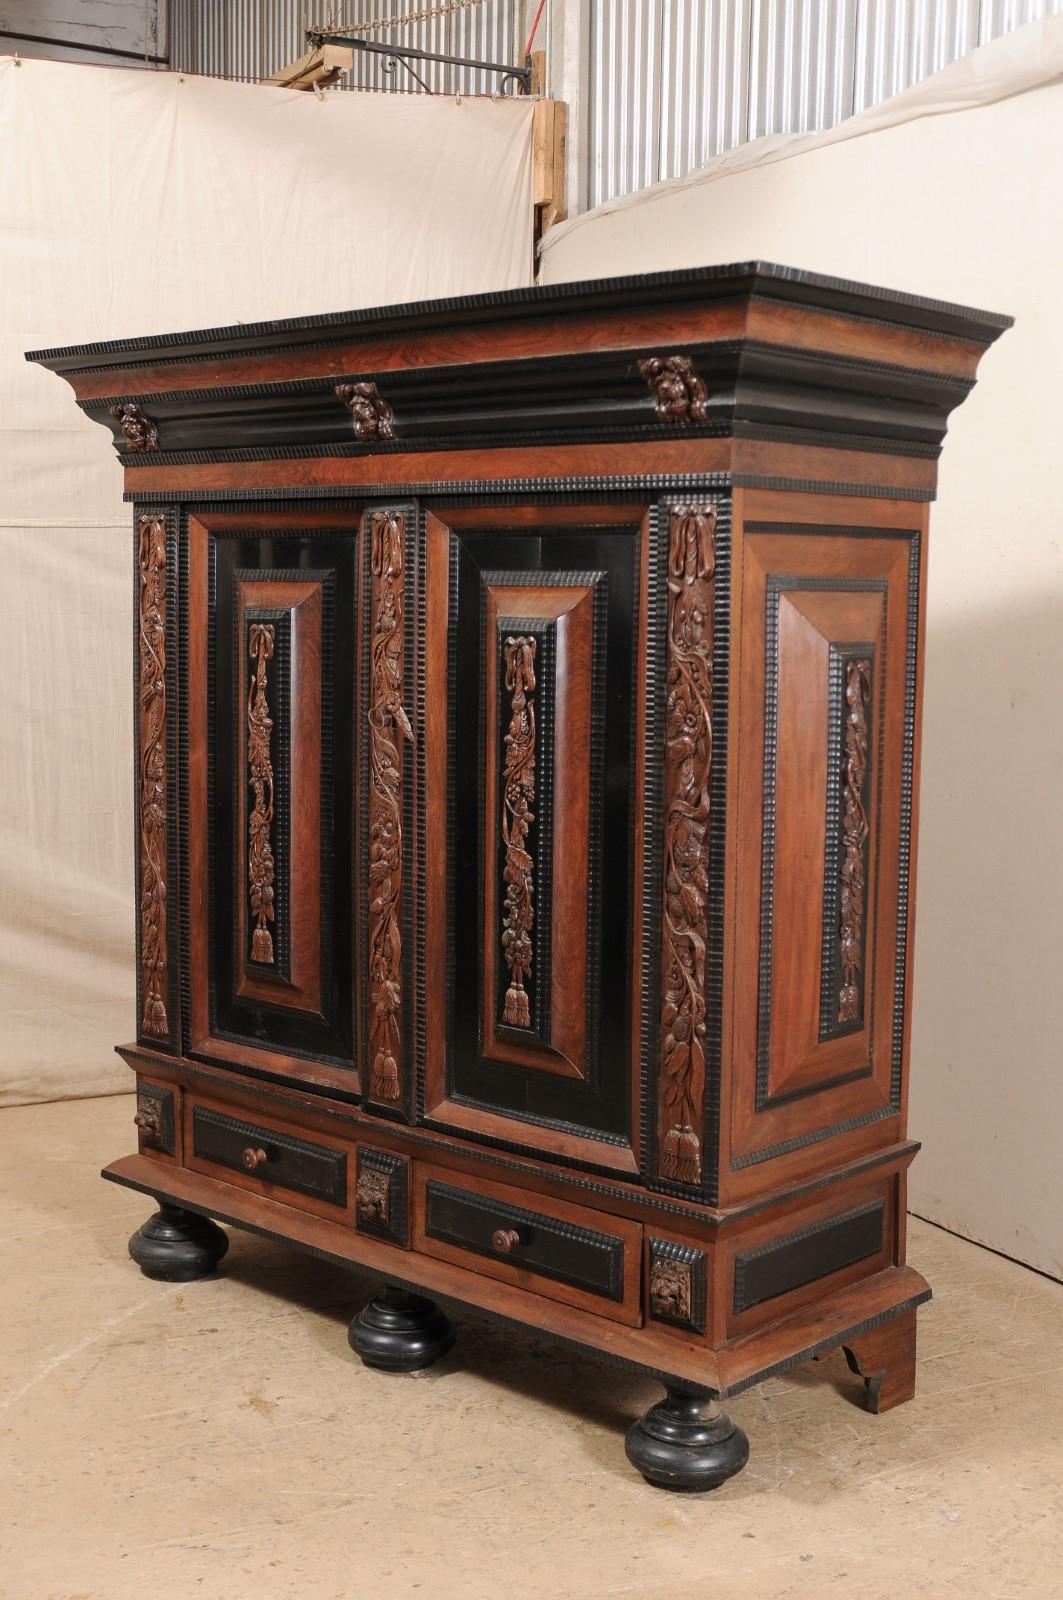 18th Century Period Baroque Kas Wardrobe Cabinet with Rich Carved Wood Details In Good Condition For Sale In Atlanta, GA